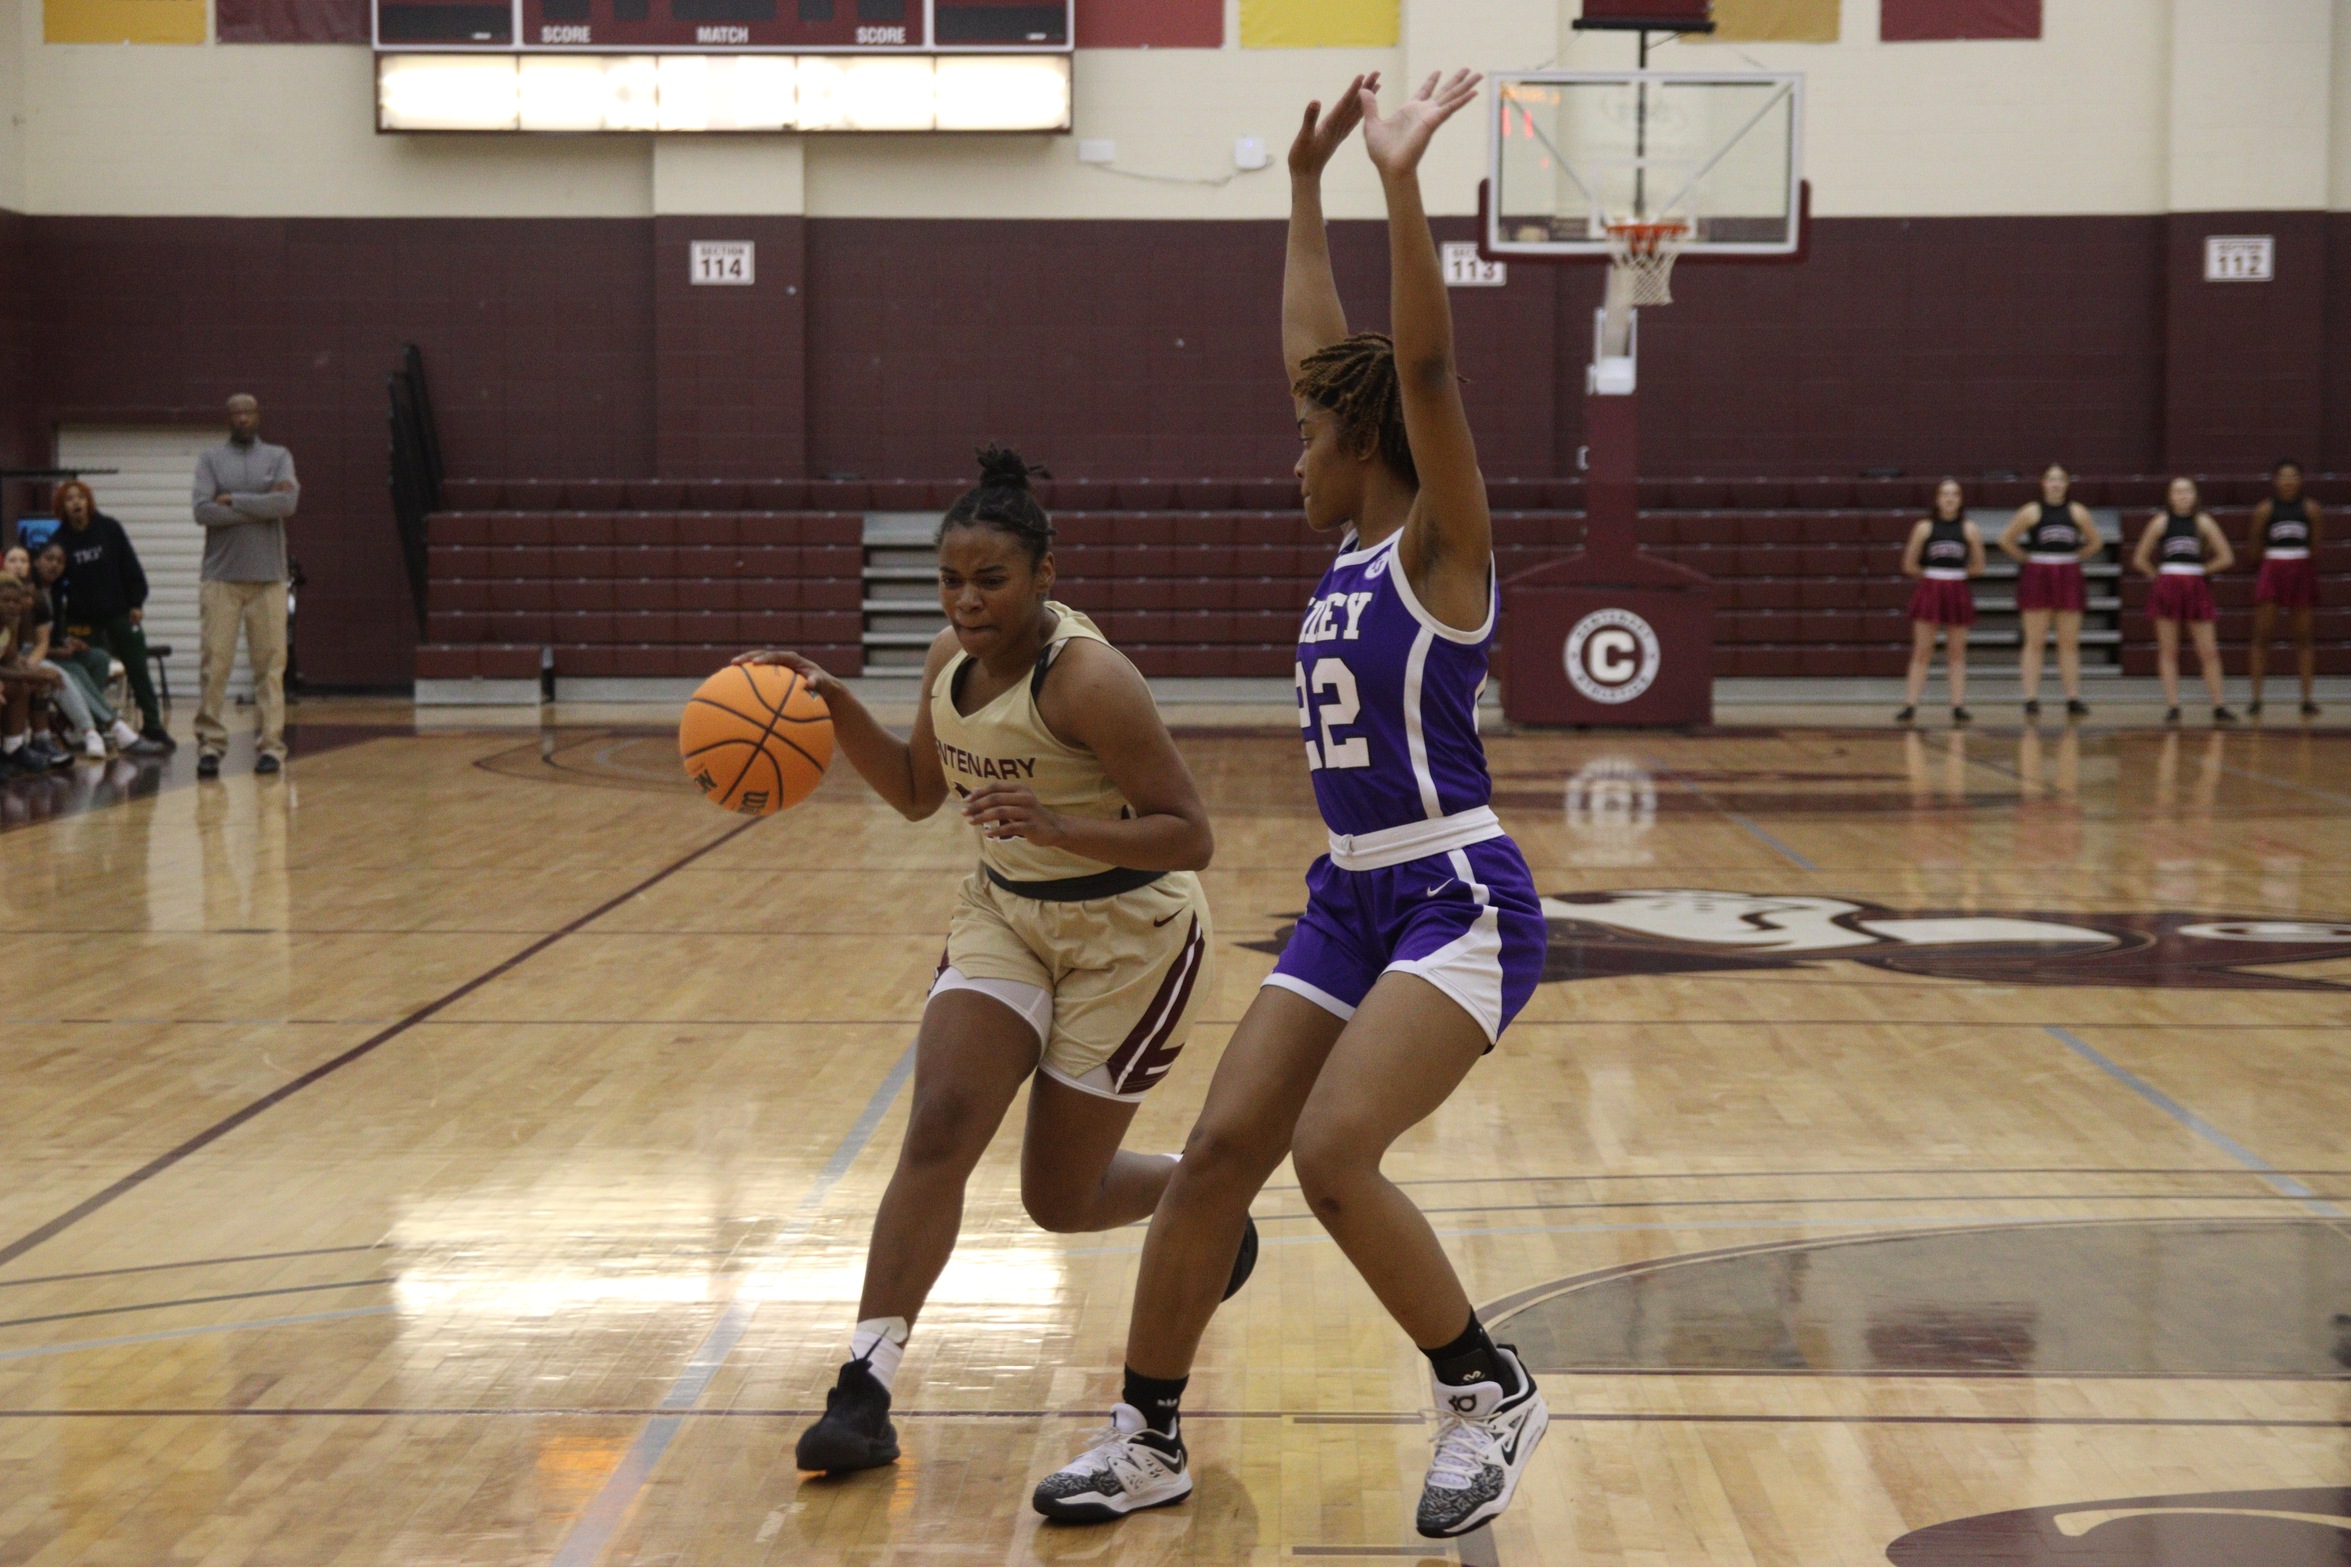 The Ladies will look to rebound on Saturday with another win over Austin College.